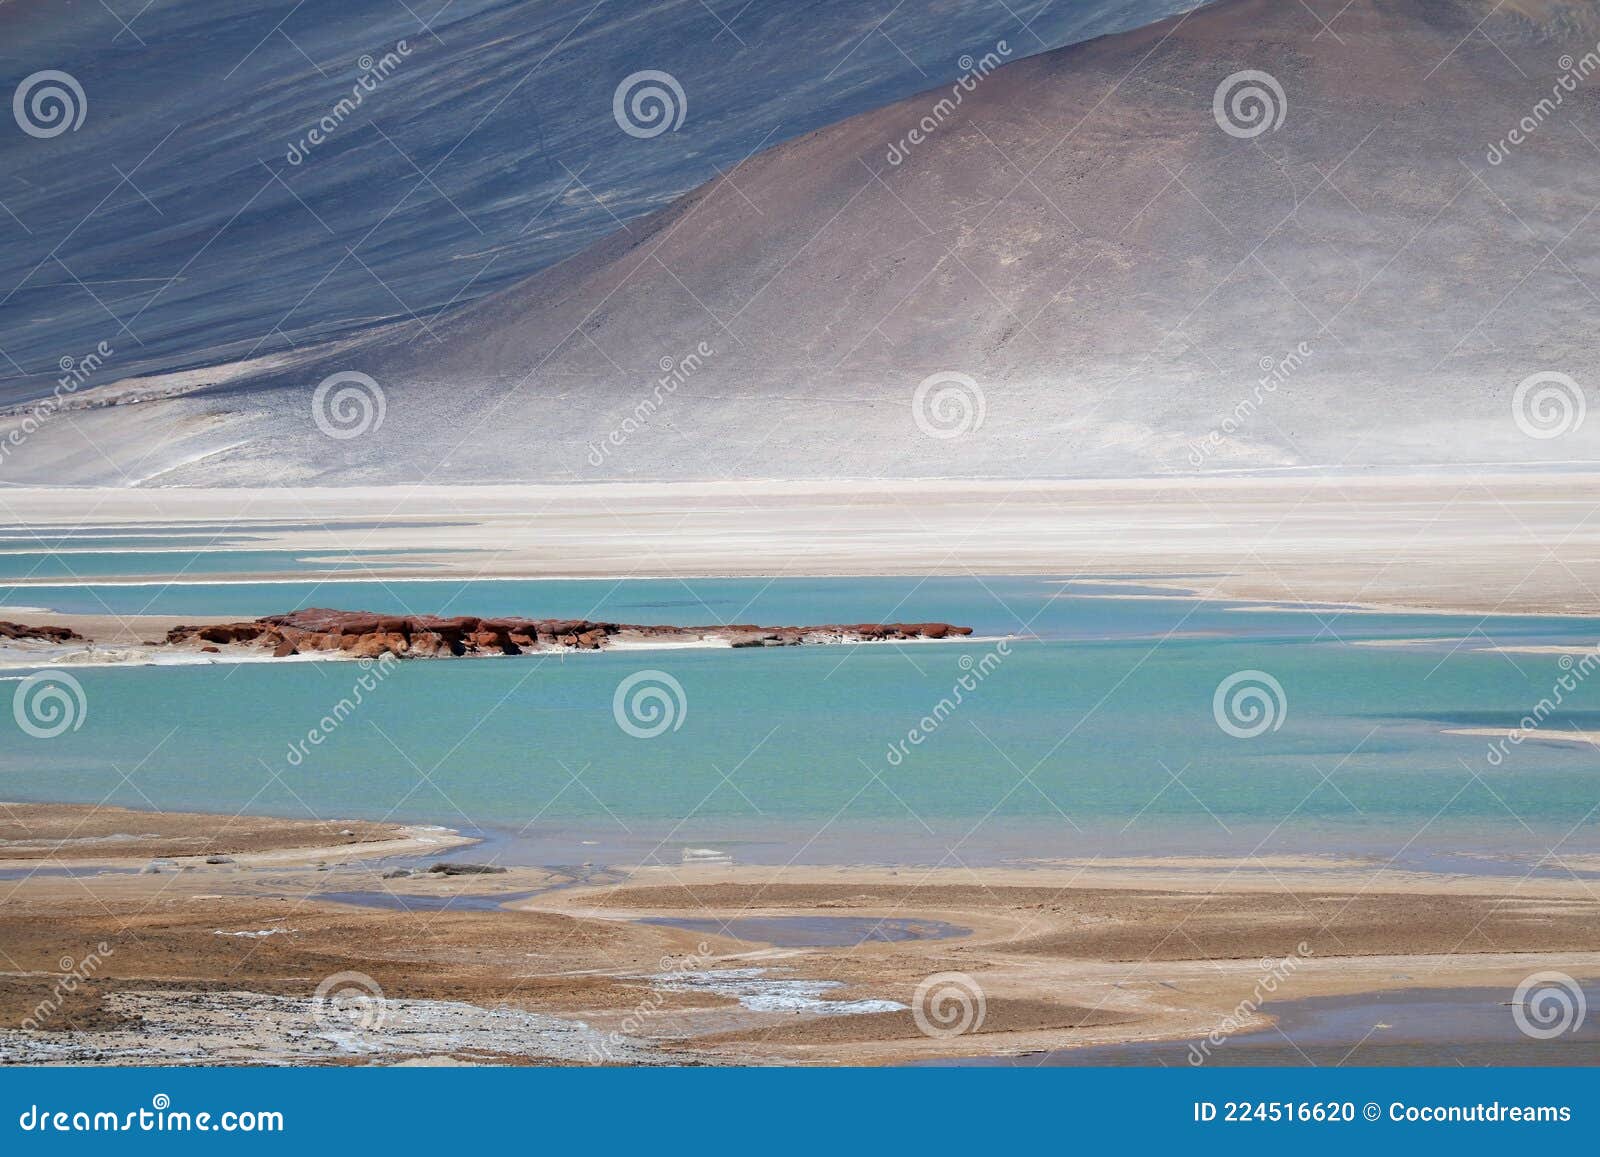 salar de talar, part of a series of high plateau salt lakes at the altitude of 3,950 m. of northern chilean andes, chile